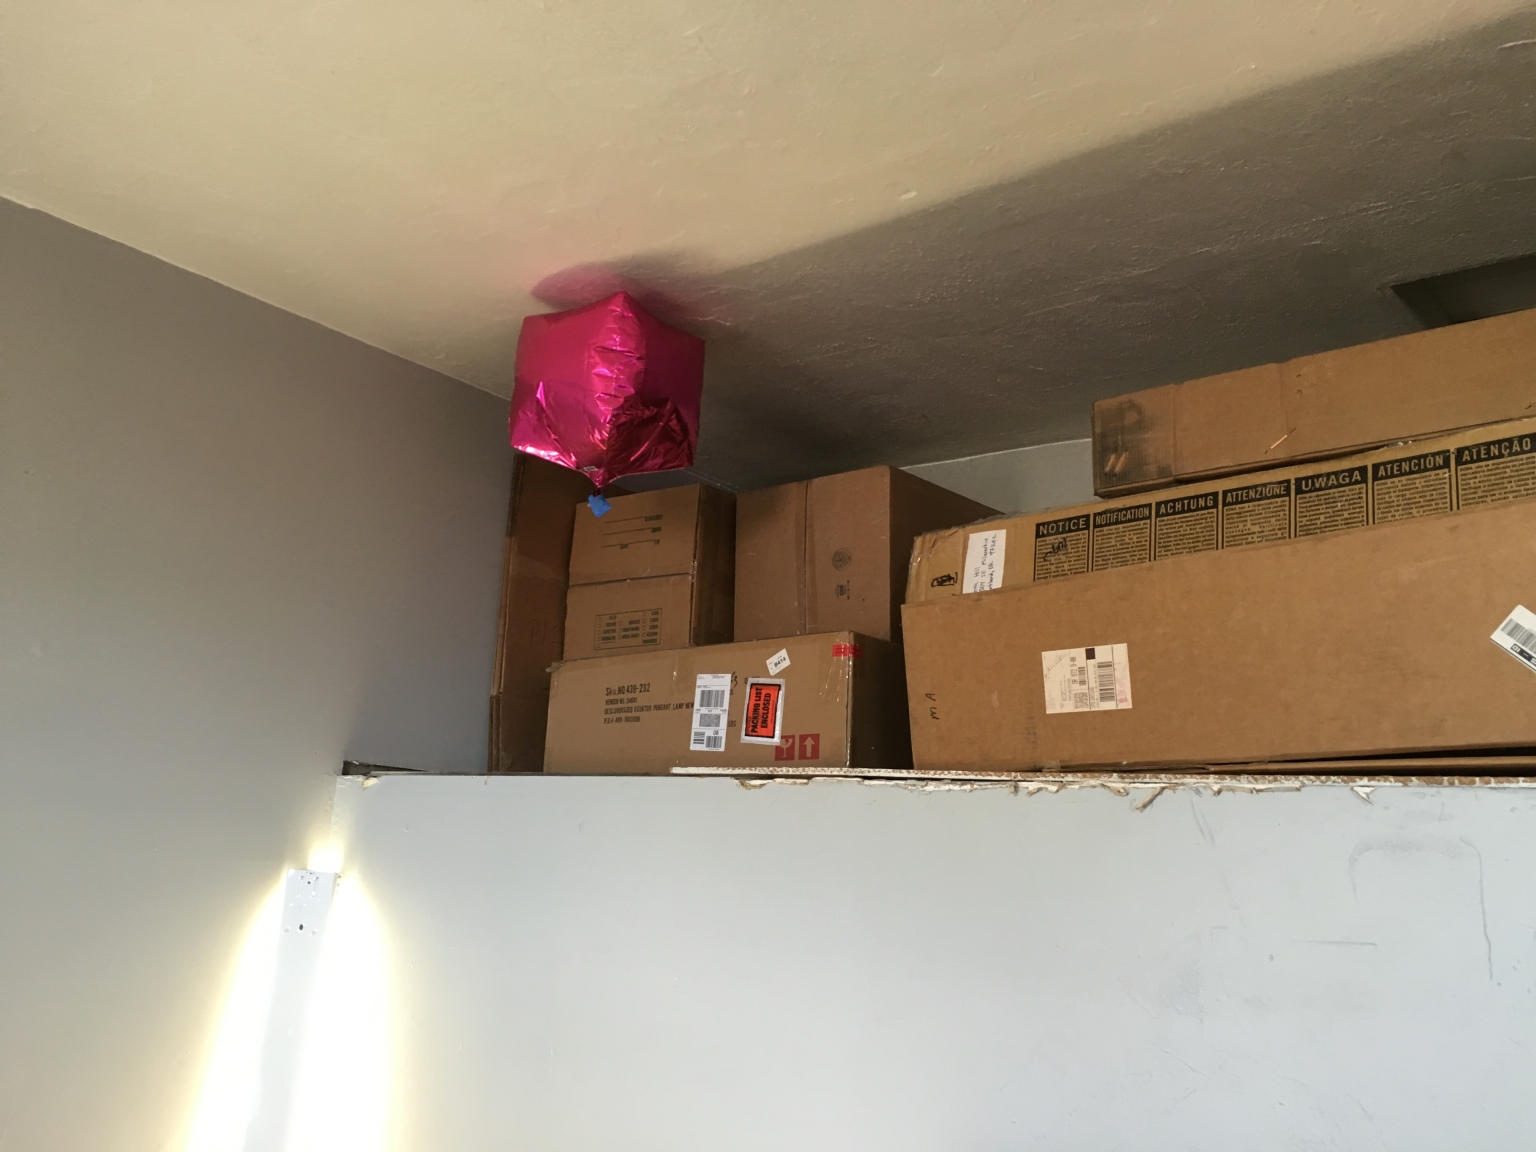 The balloon is near the ceiling